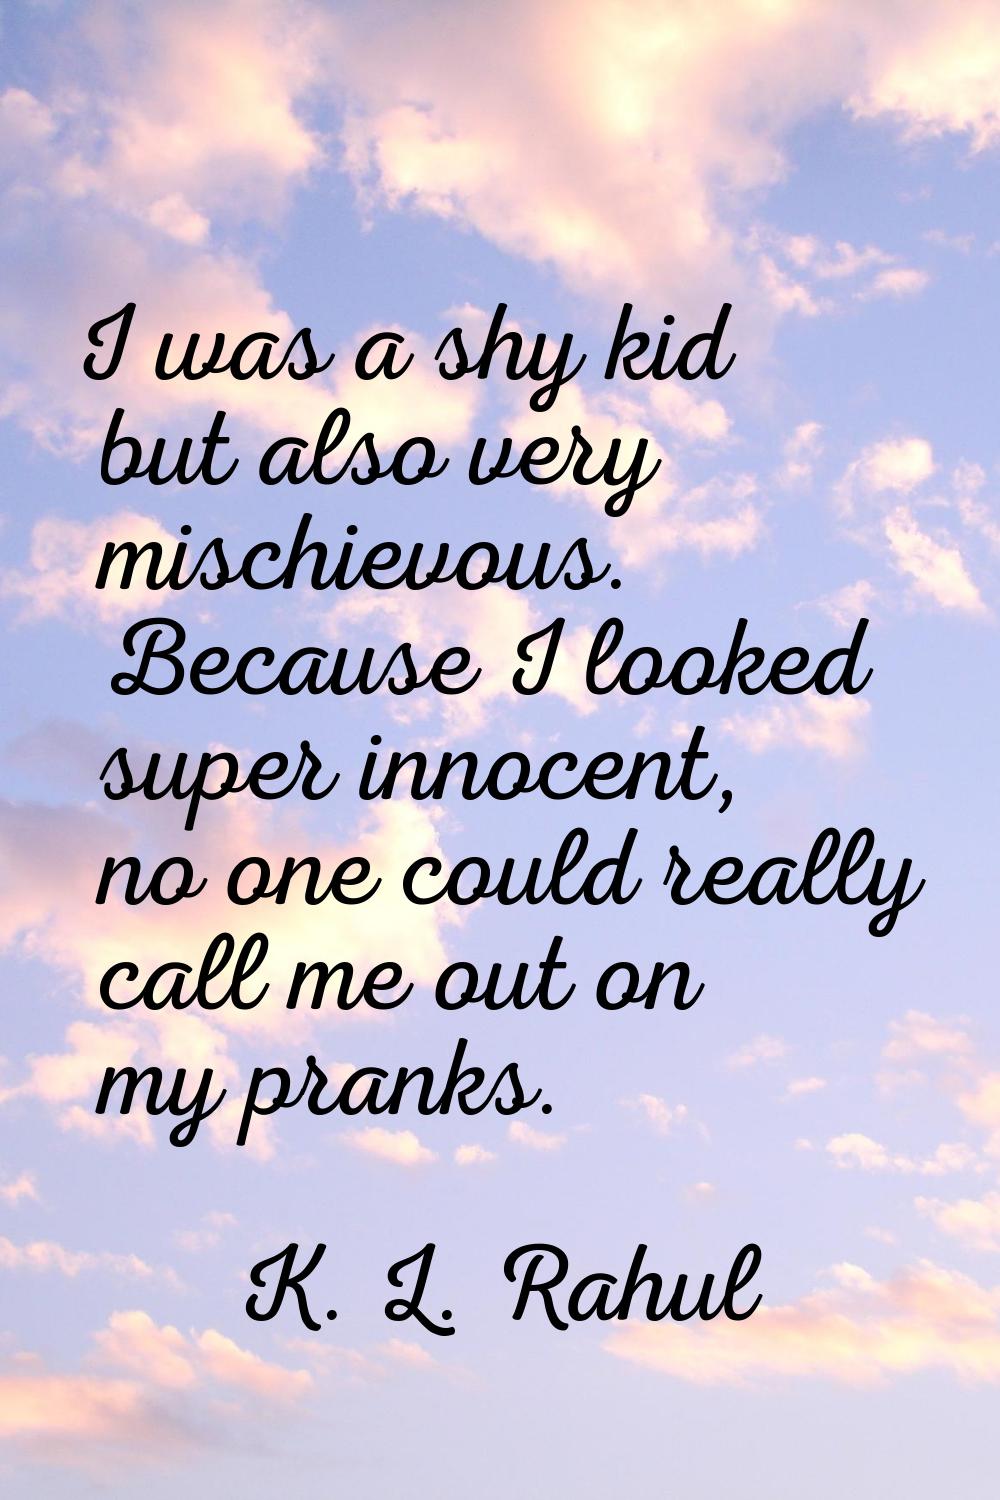 I was a shy kid but also very mischievous. Because I looked super innocent, no one could really cal